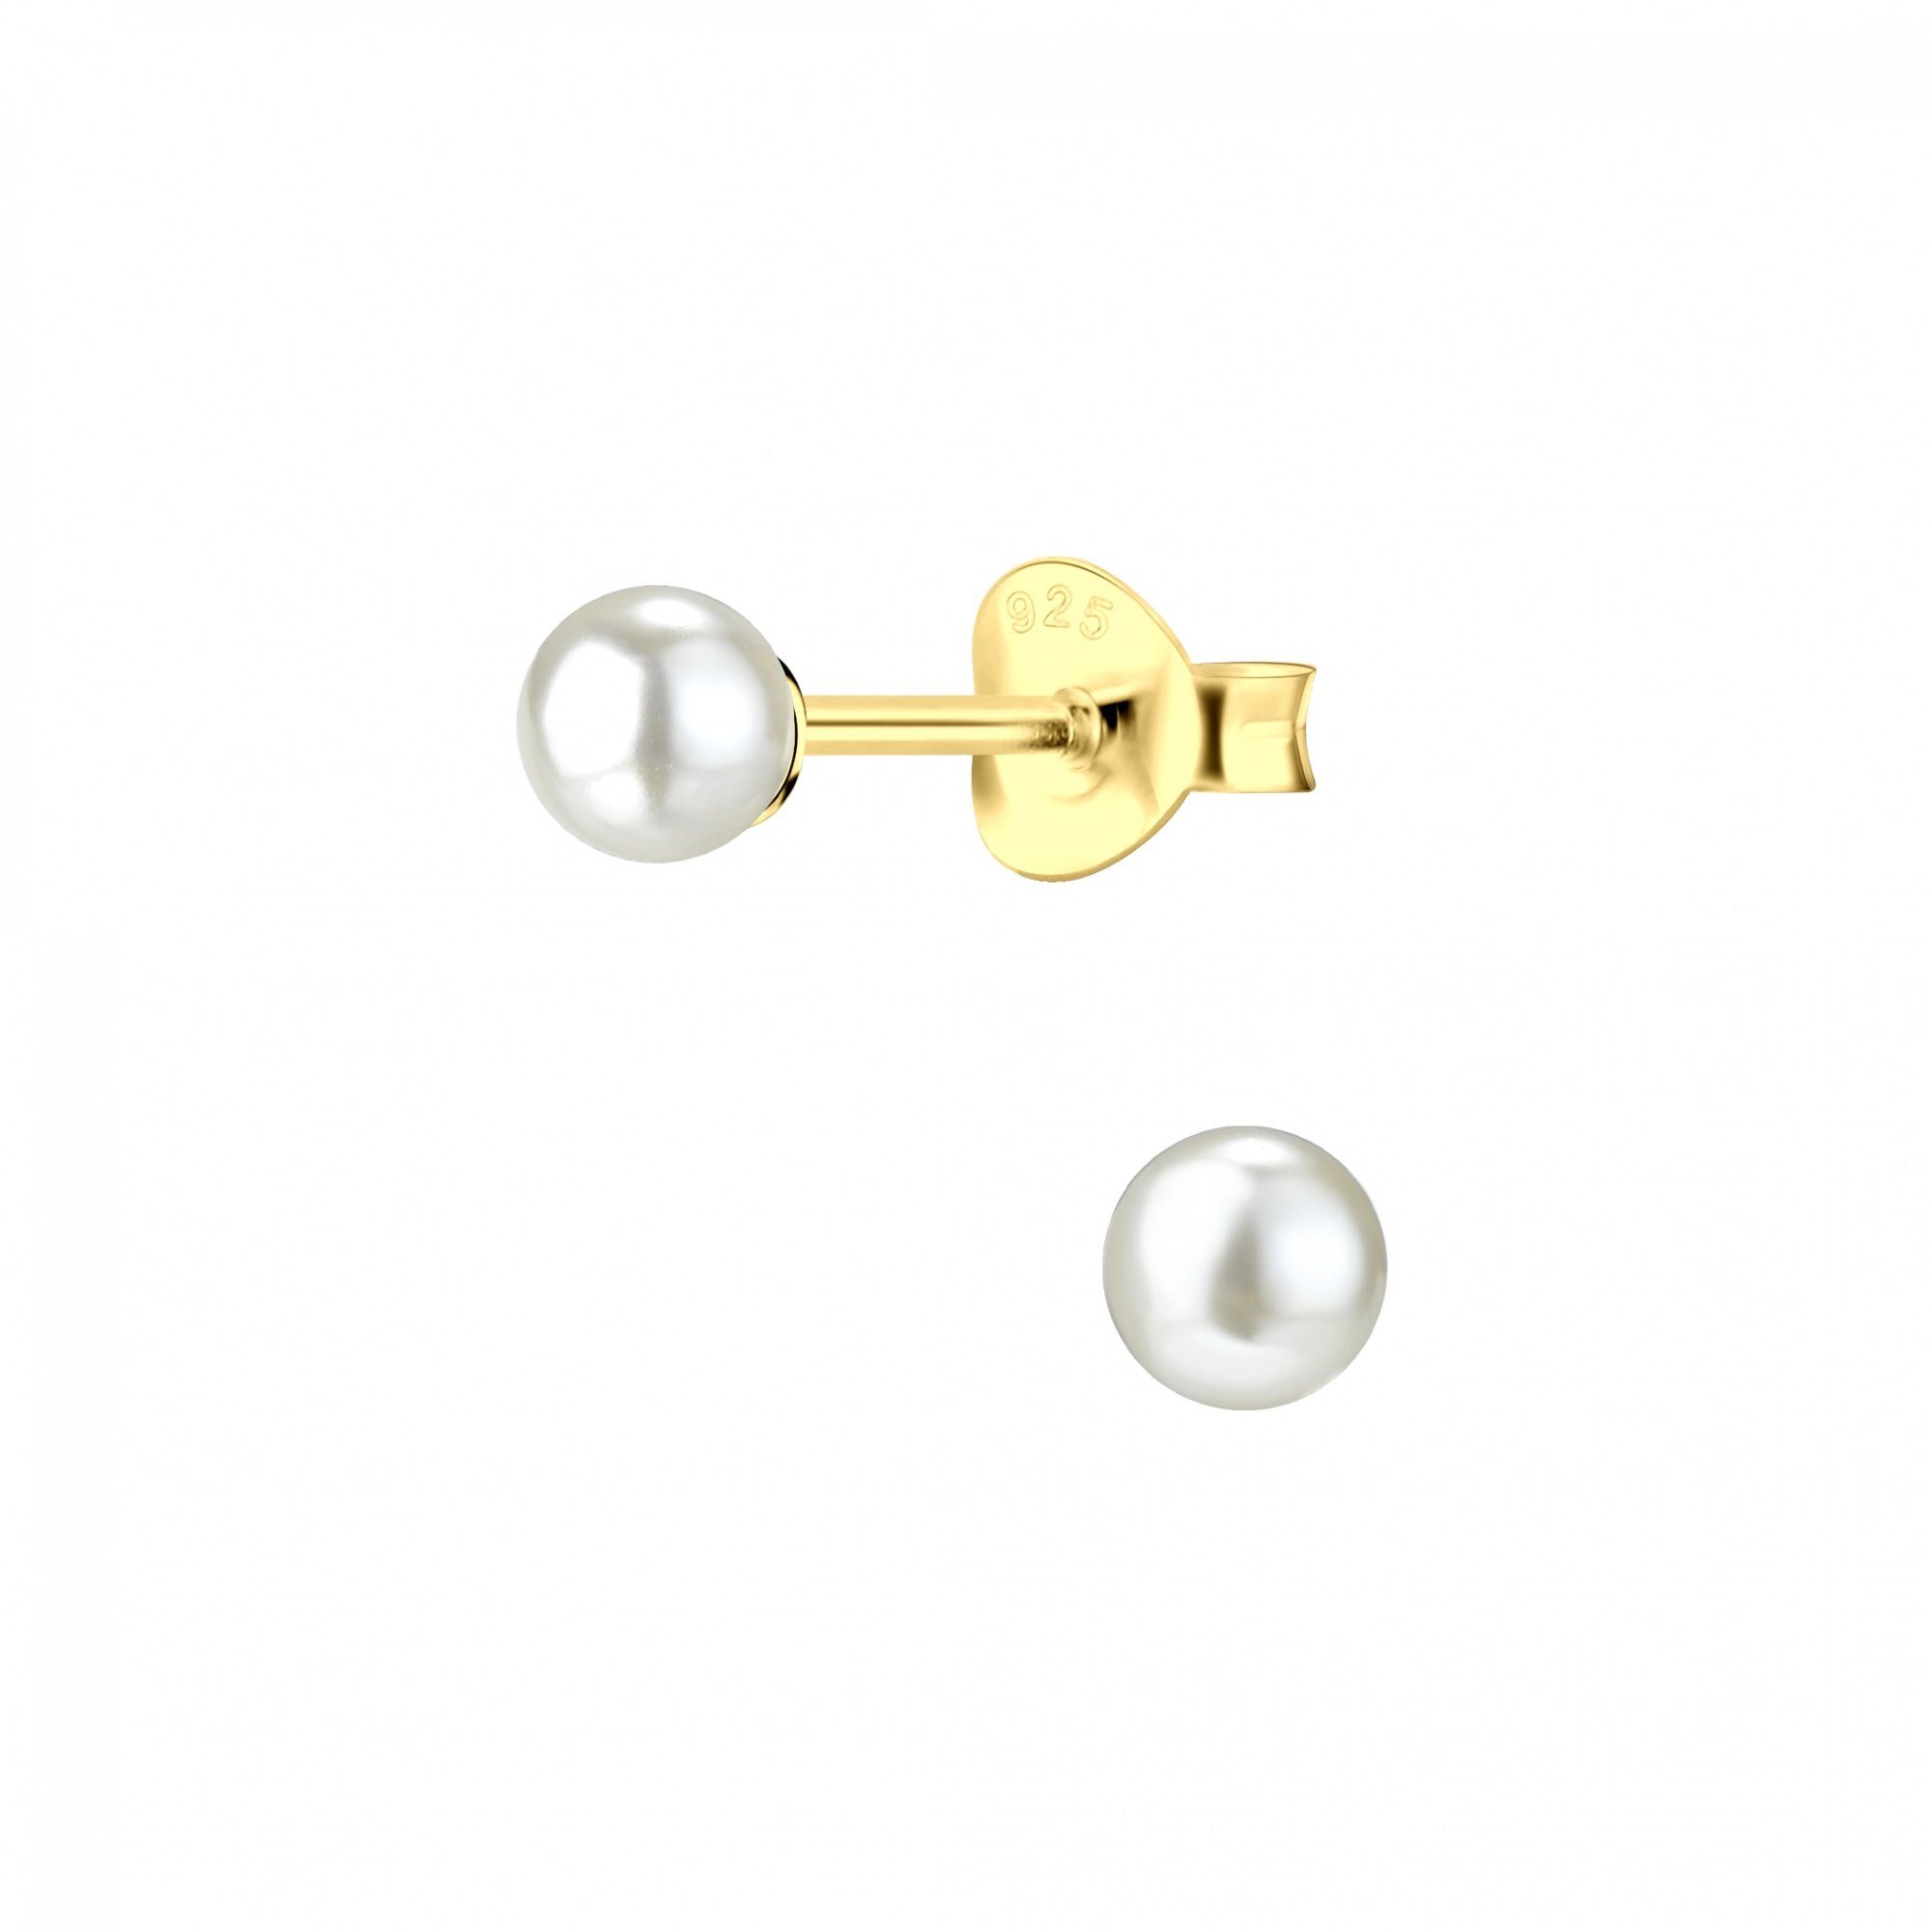 ALEXANDER YORK Paar Ohrstecker PERLE classic 4 mm in Gold I weiß, 2-tlg., 925 Sterling Silber